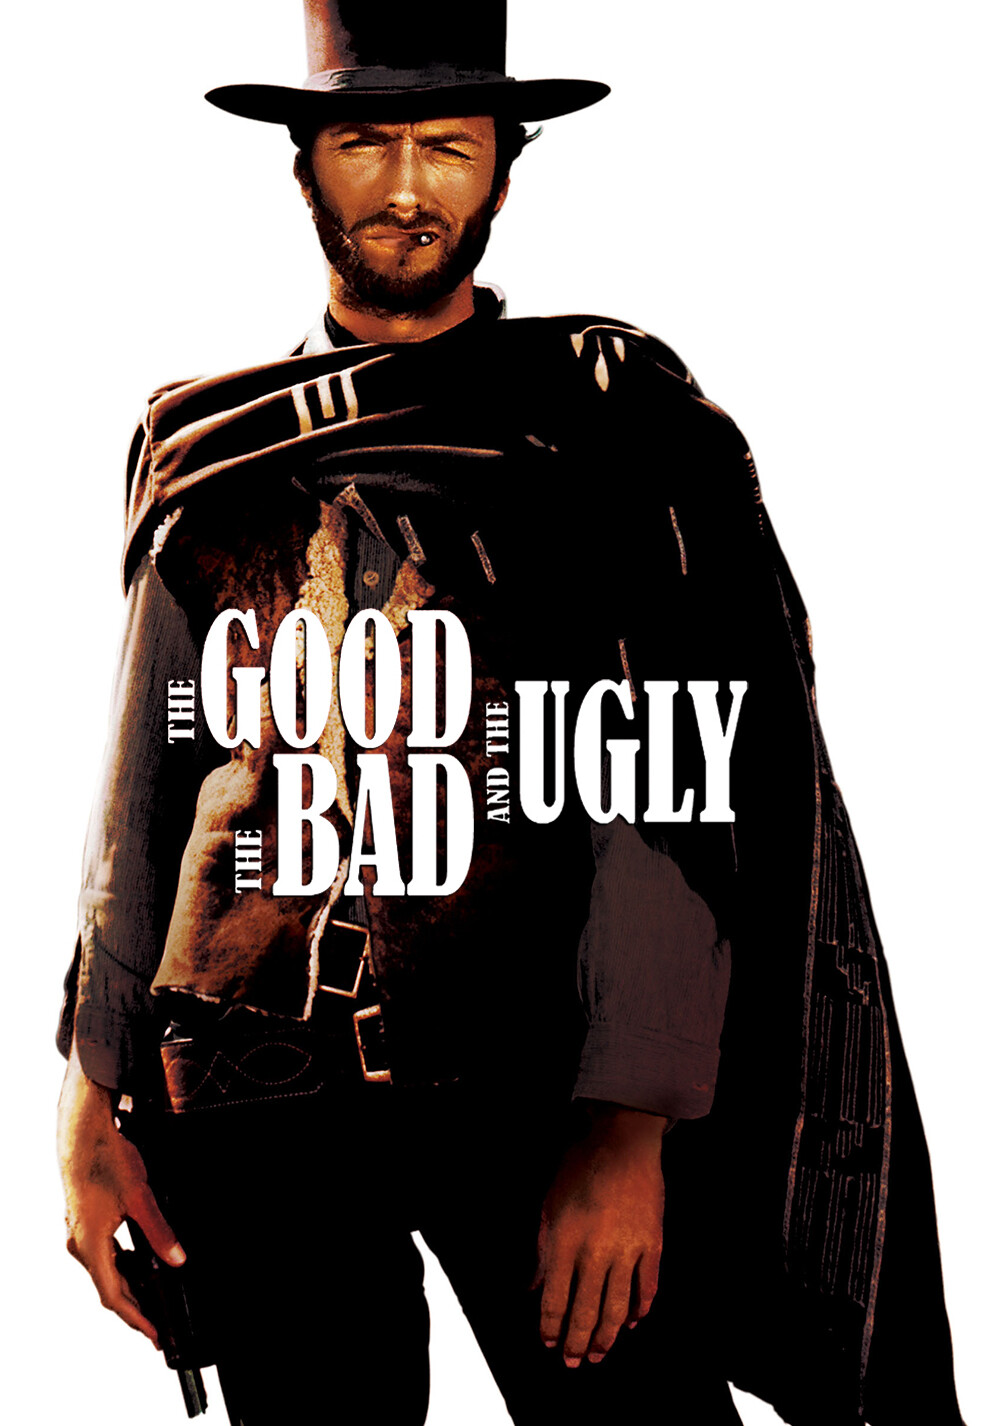 The Good the Bad and the Ugly 1966 2160p UHD BluRay x265-B0MBARDiERS